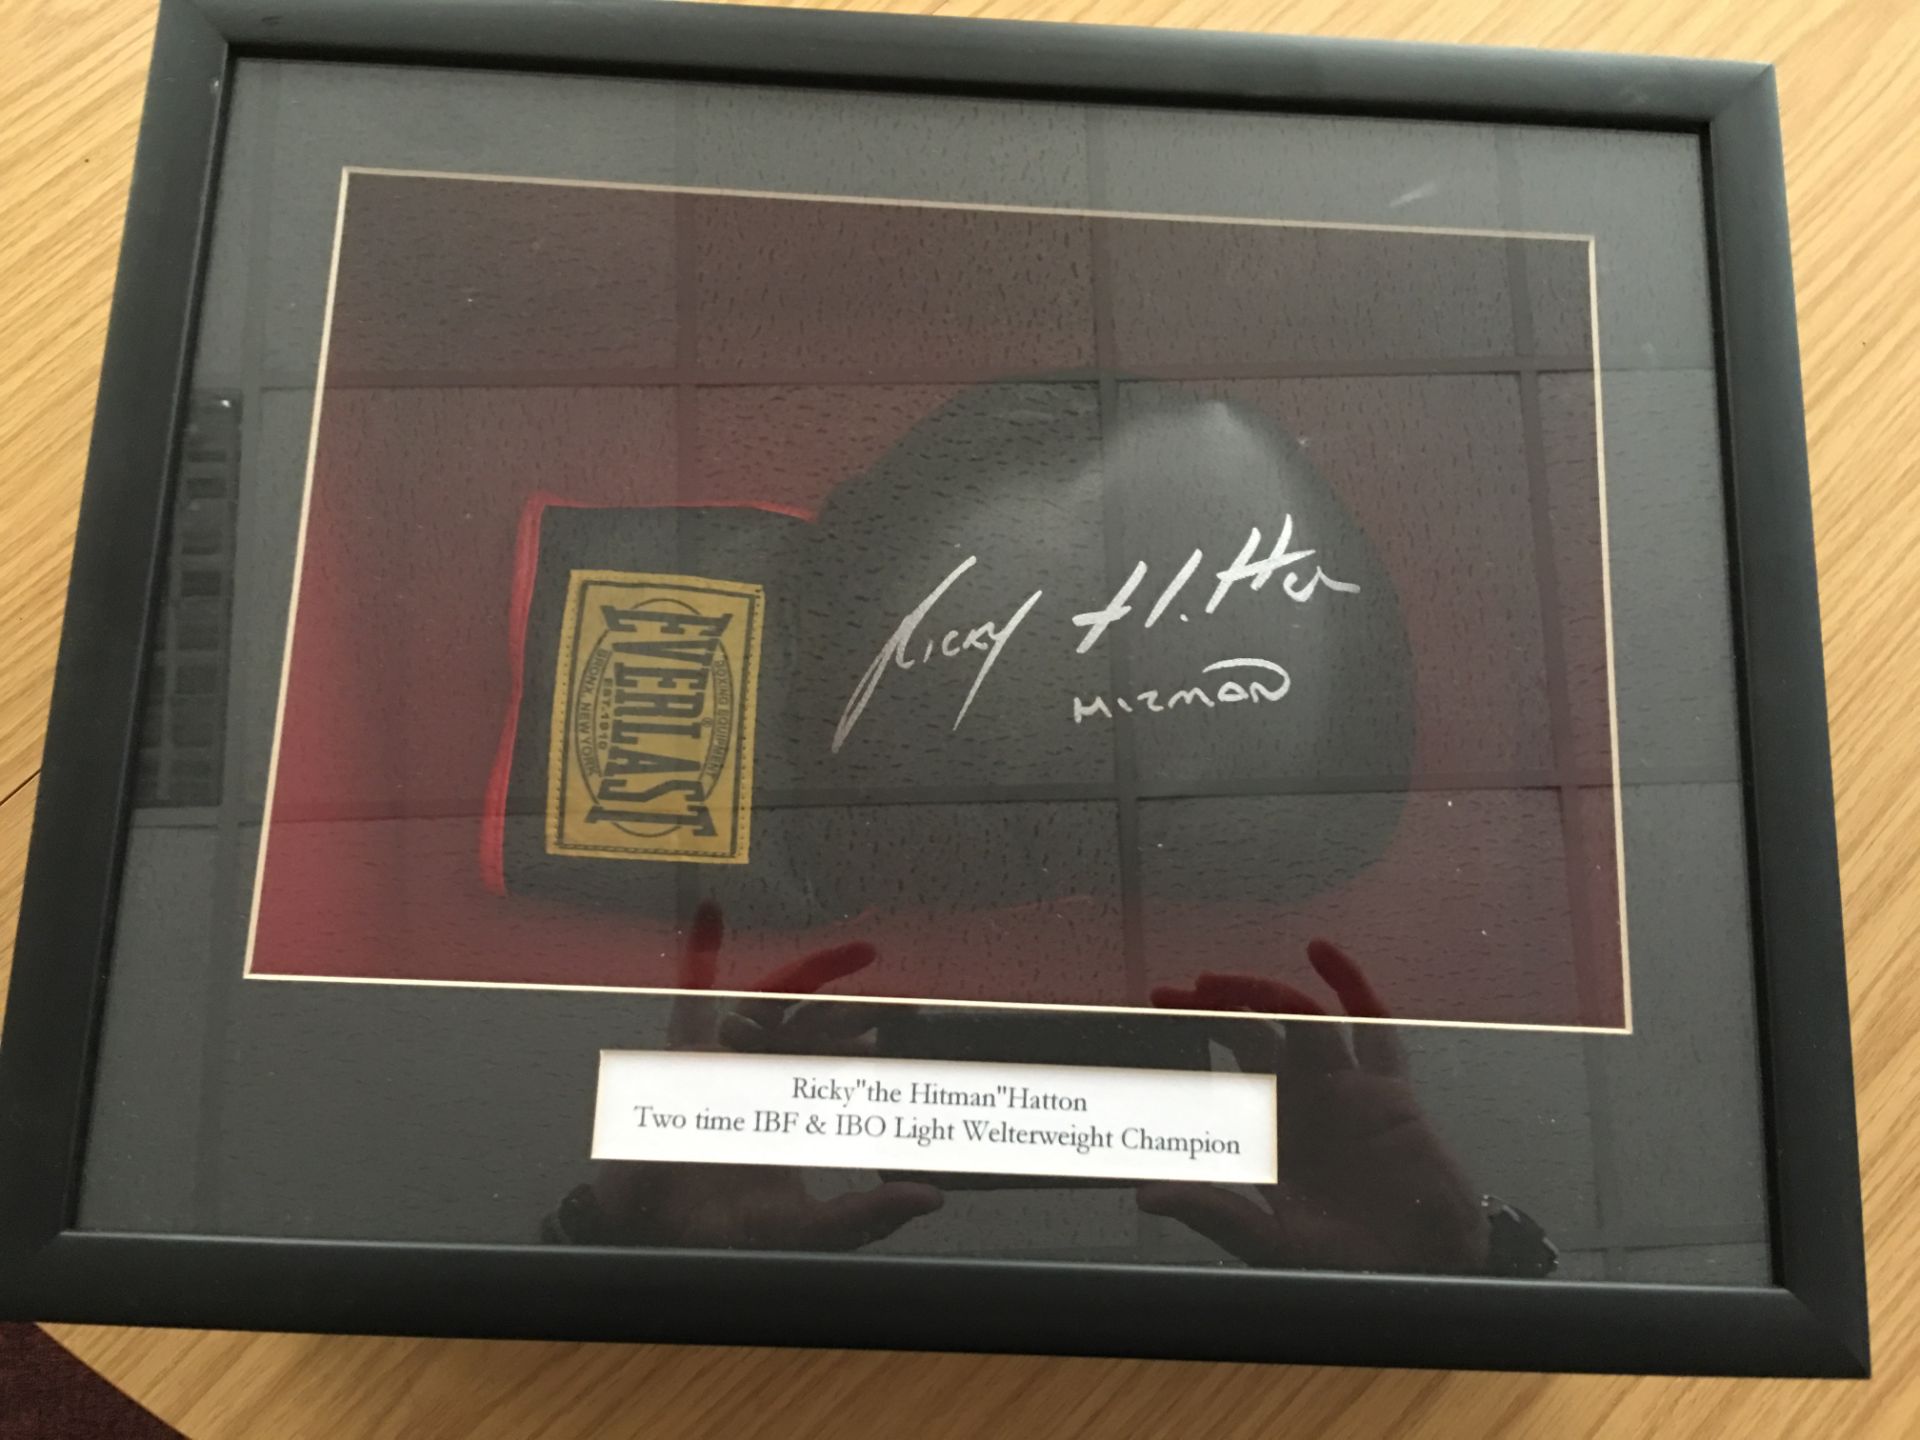 Signed Ricky Hatton boxing glove in presentation case